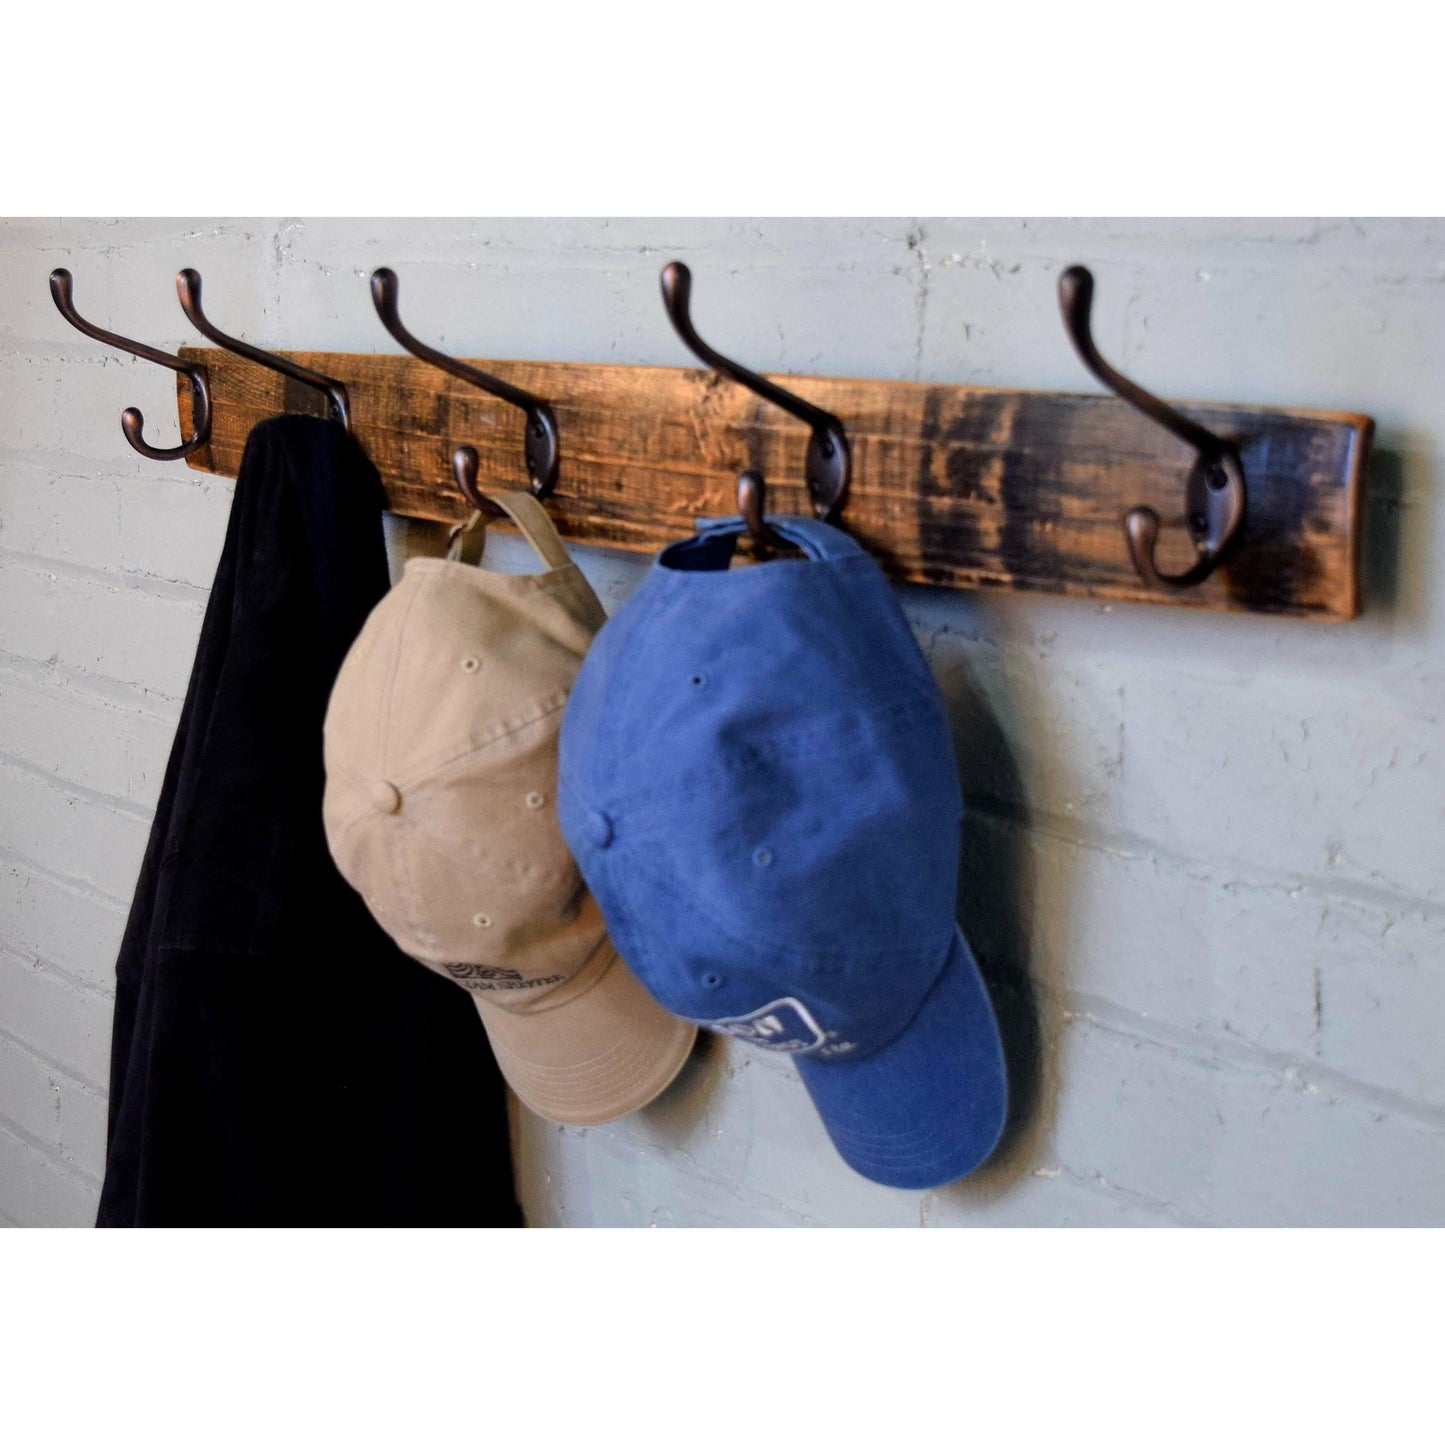 WILLIAM Sheppee USA Wall Coat Rack William Sheepee Shooter's Whiskey Stave Coat Rack- SHO117